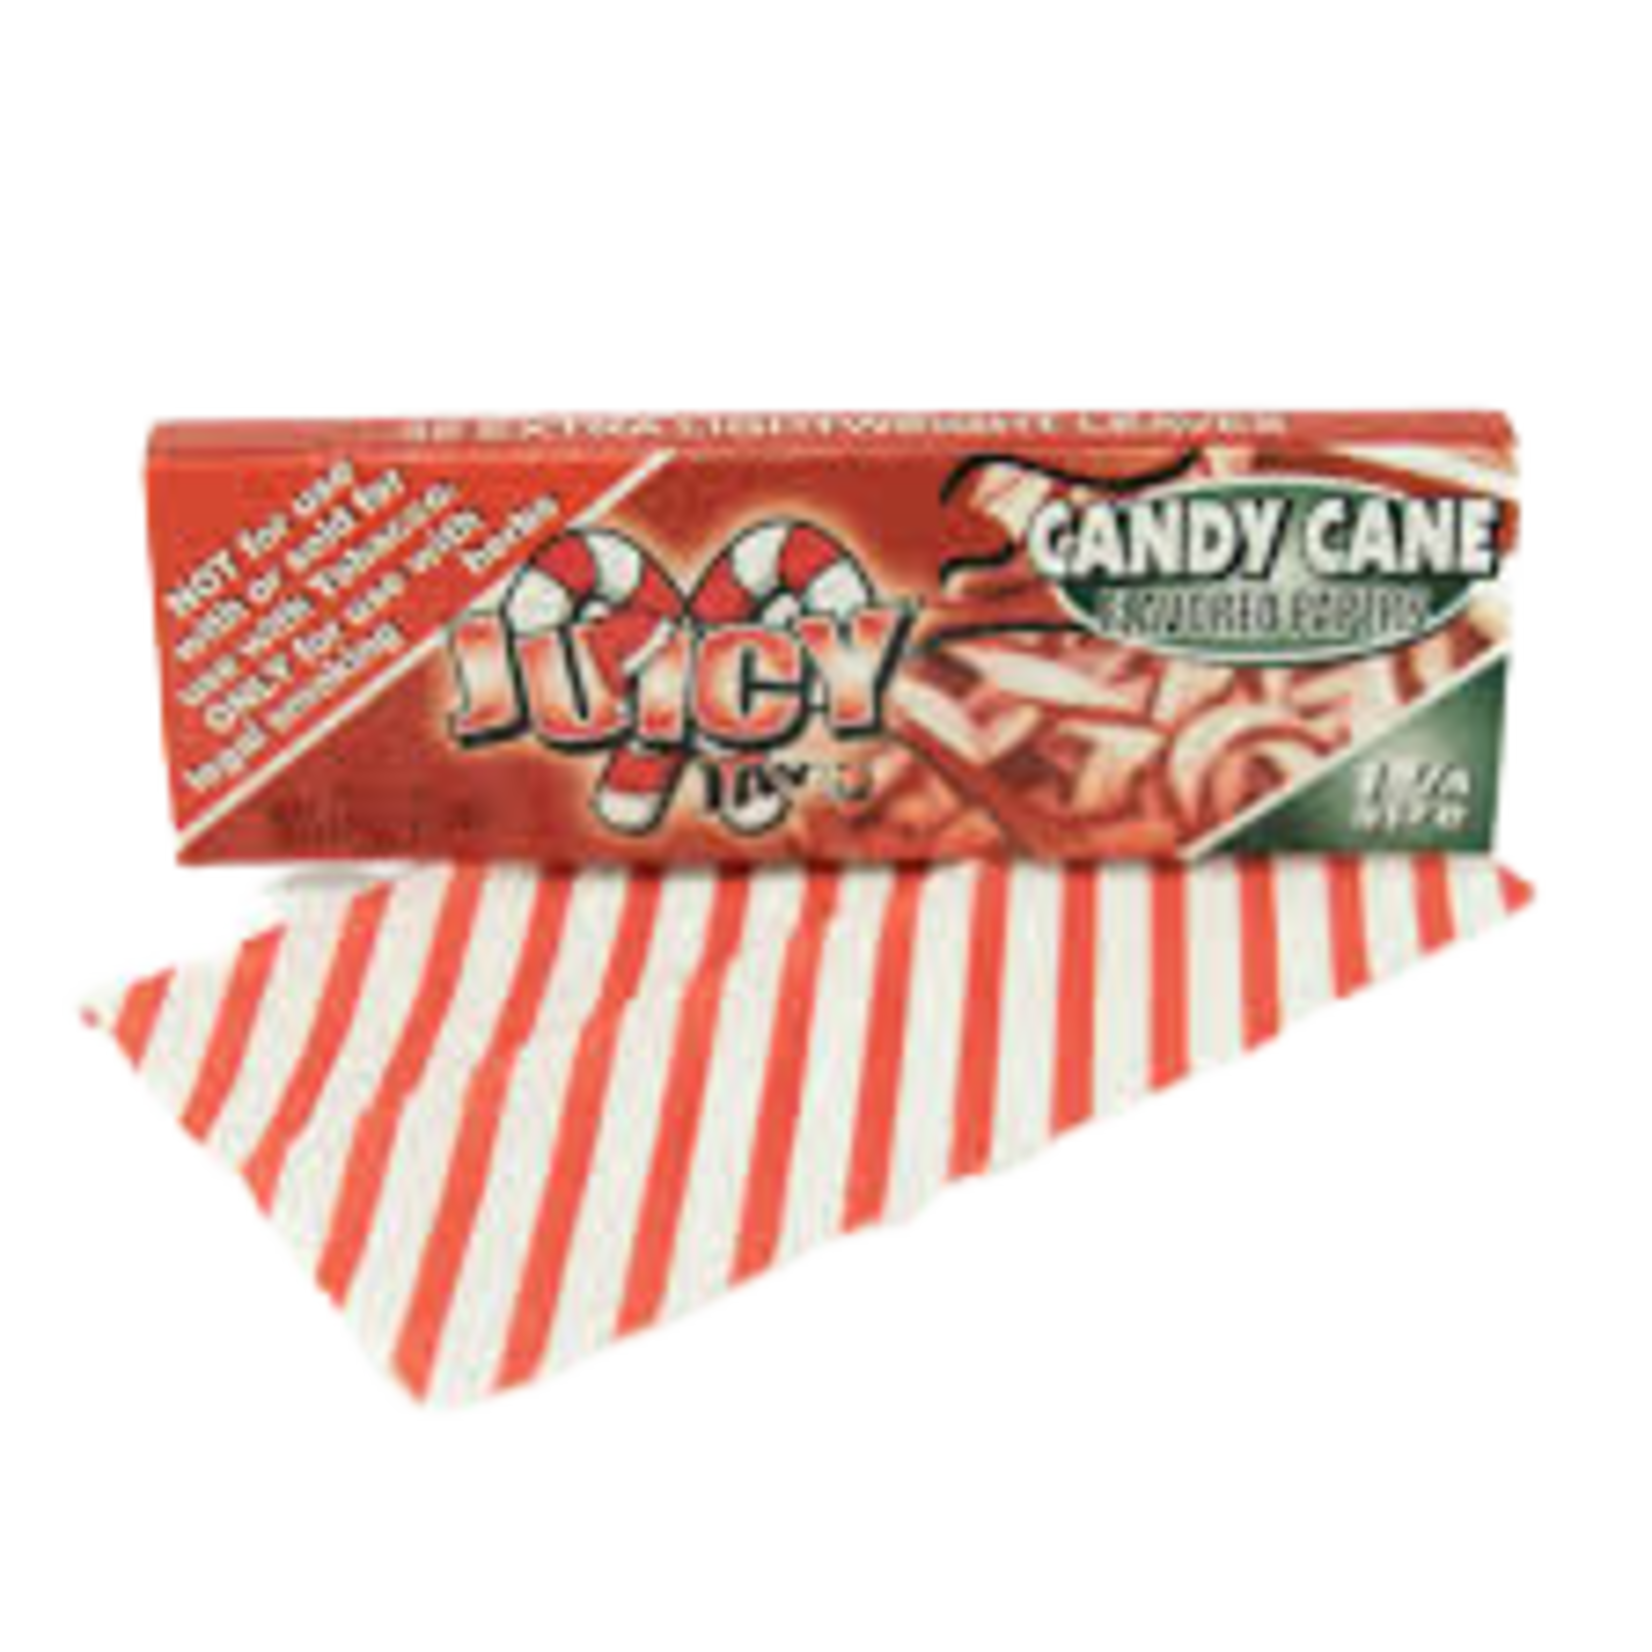 JUICY JAY'S - CANDY CANE